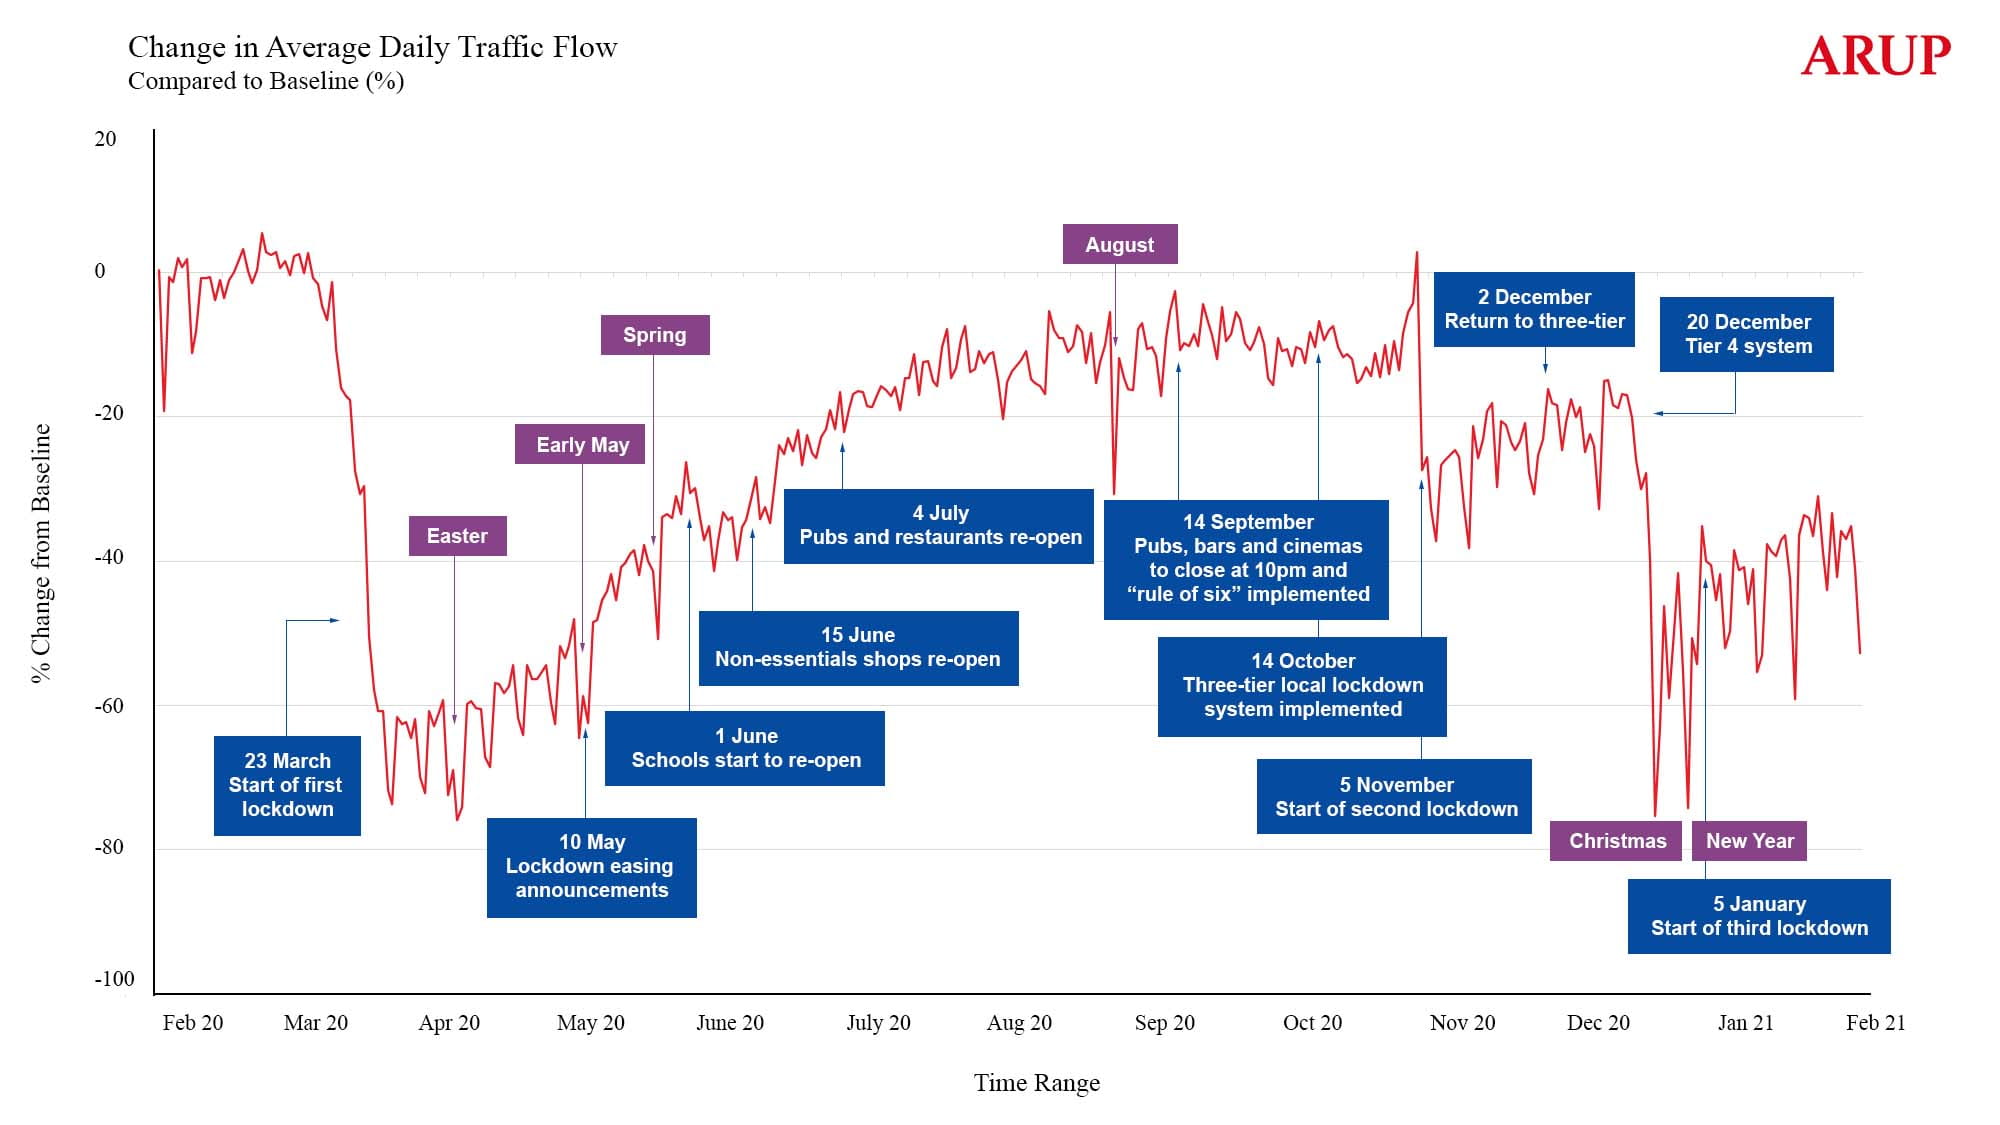 Change in average daily traffic flow